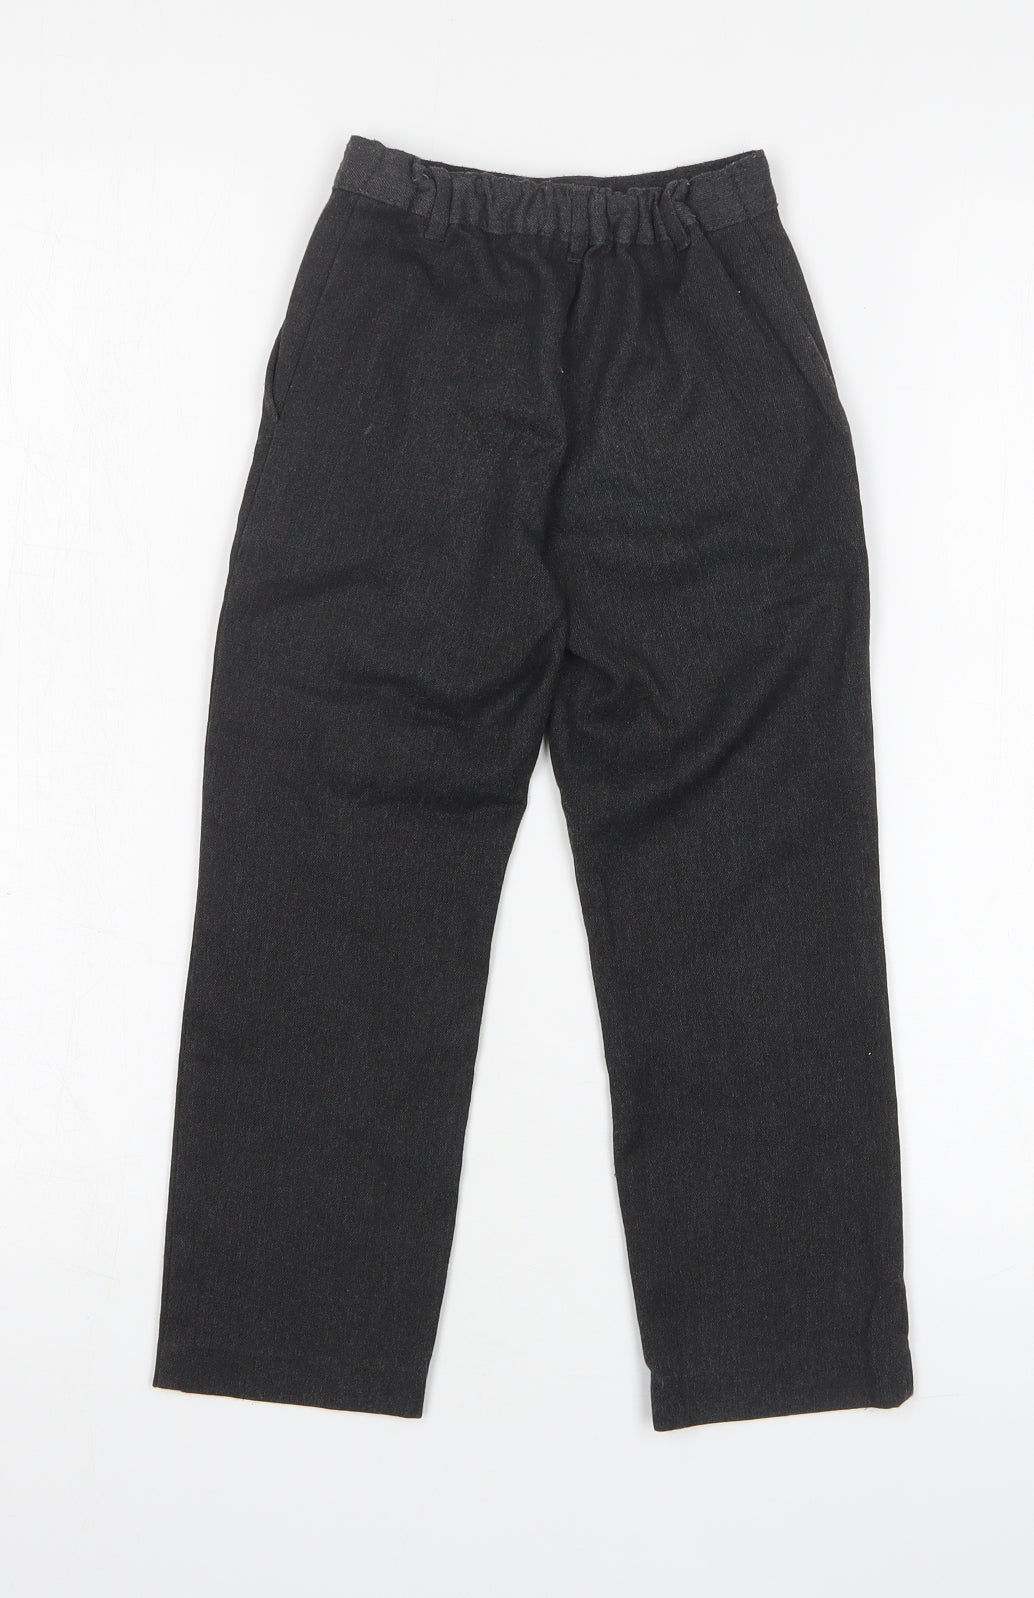 George Boys Grey Polyester Dress Pants Trousers Size 5-6 Years Regular Zip